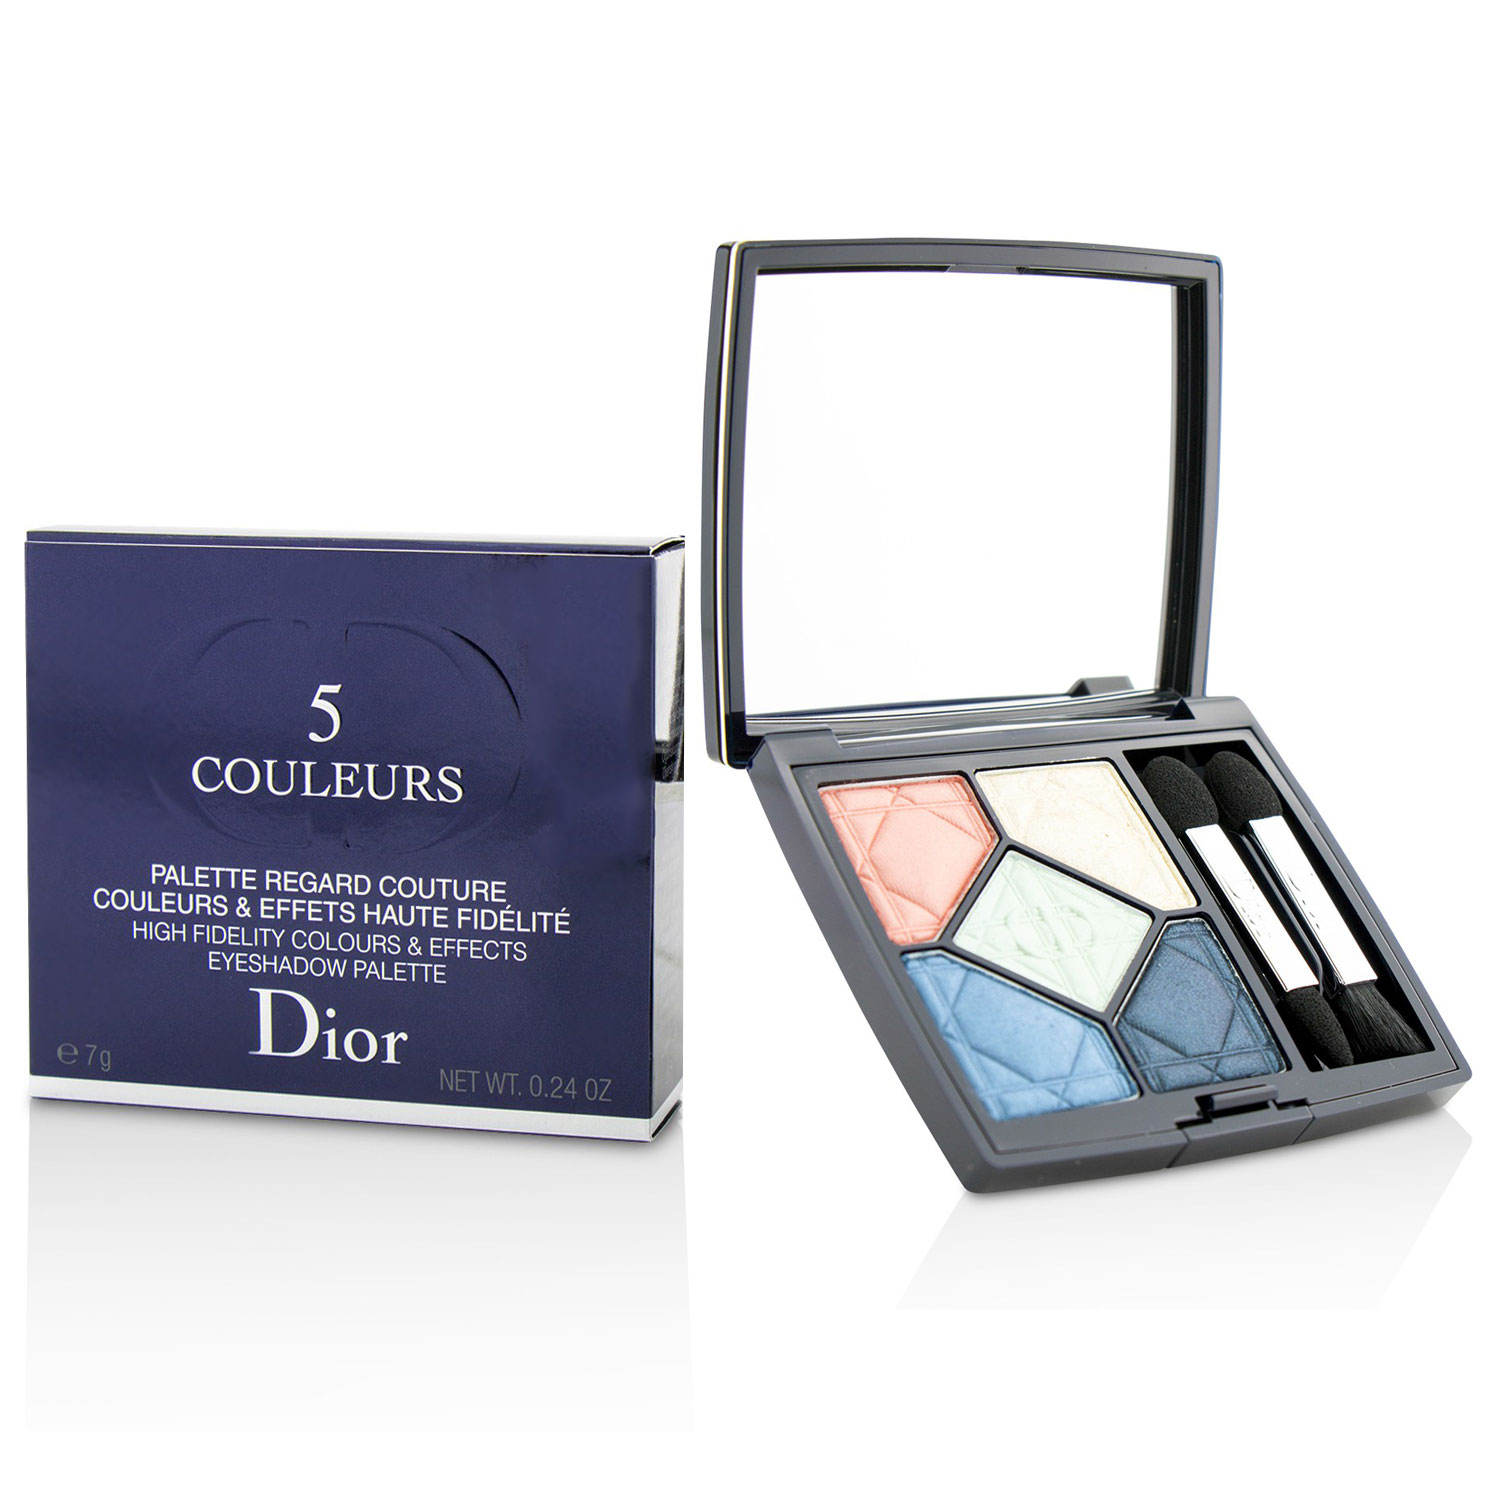 5 Couleurs High Fidelity Colors & Effects Eyeshadow Palette - # 357 Electrify Christian Dior Image